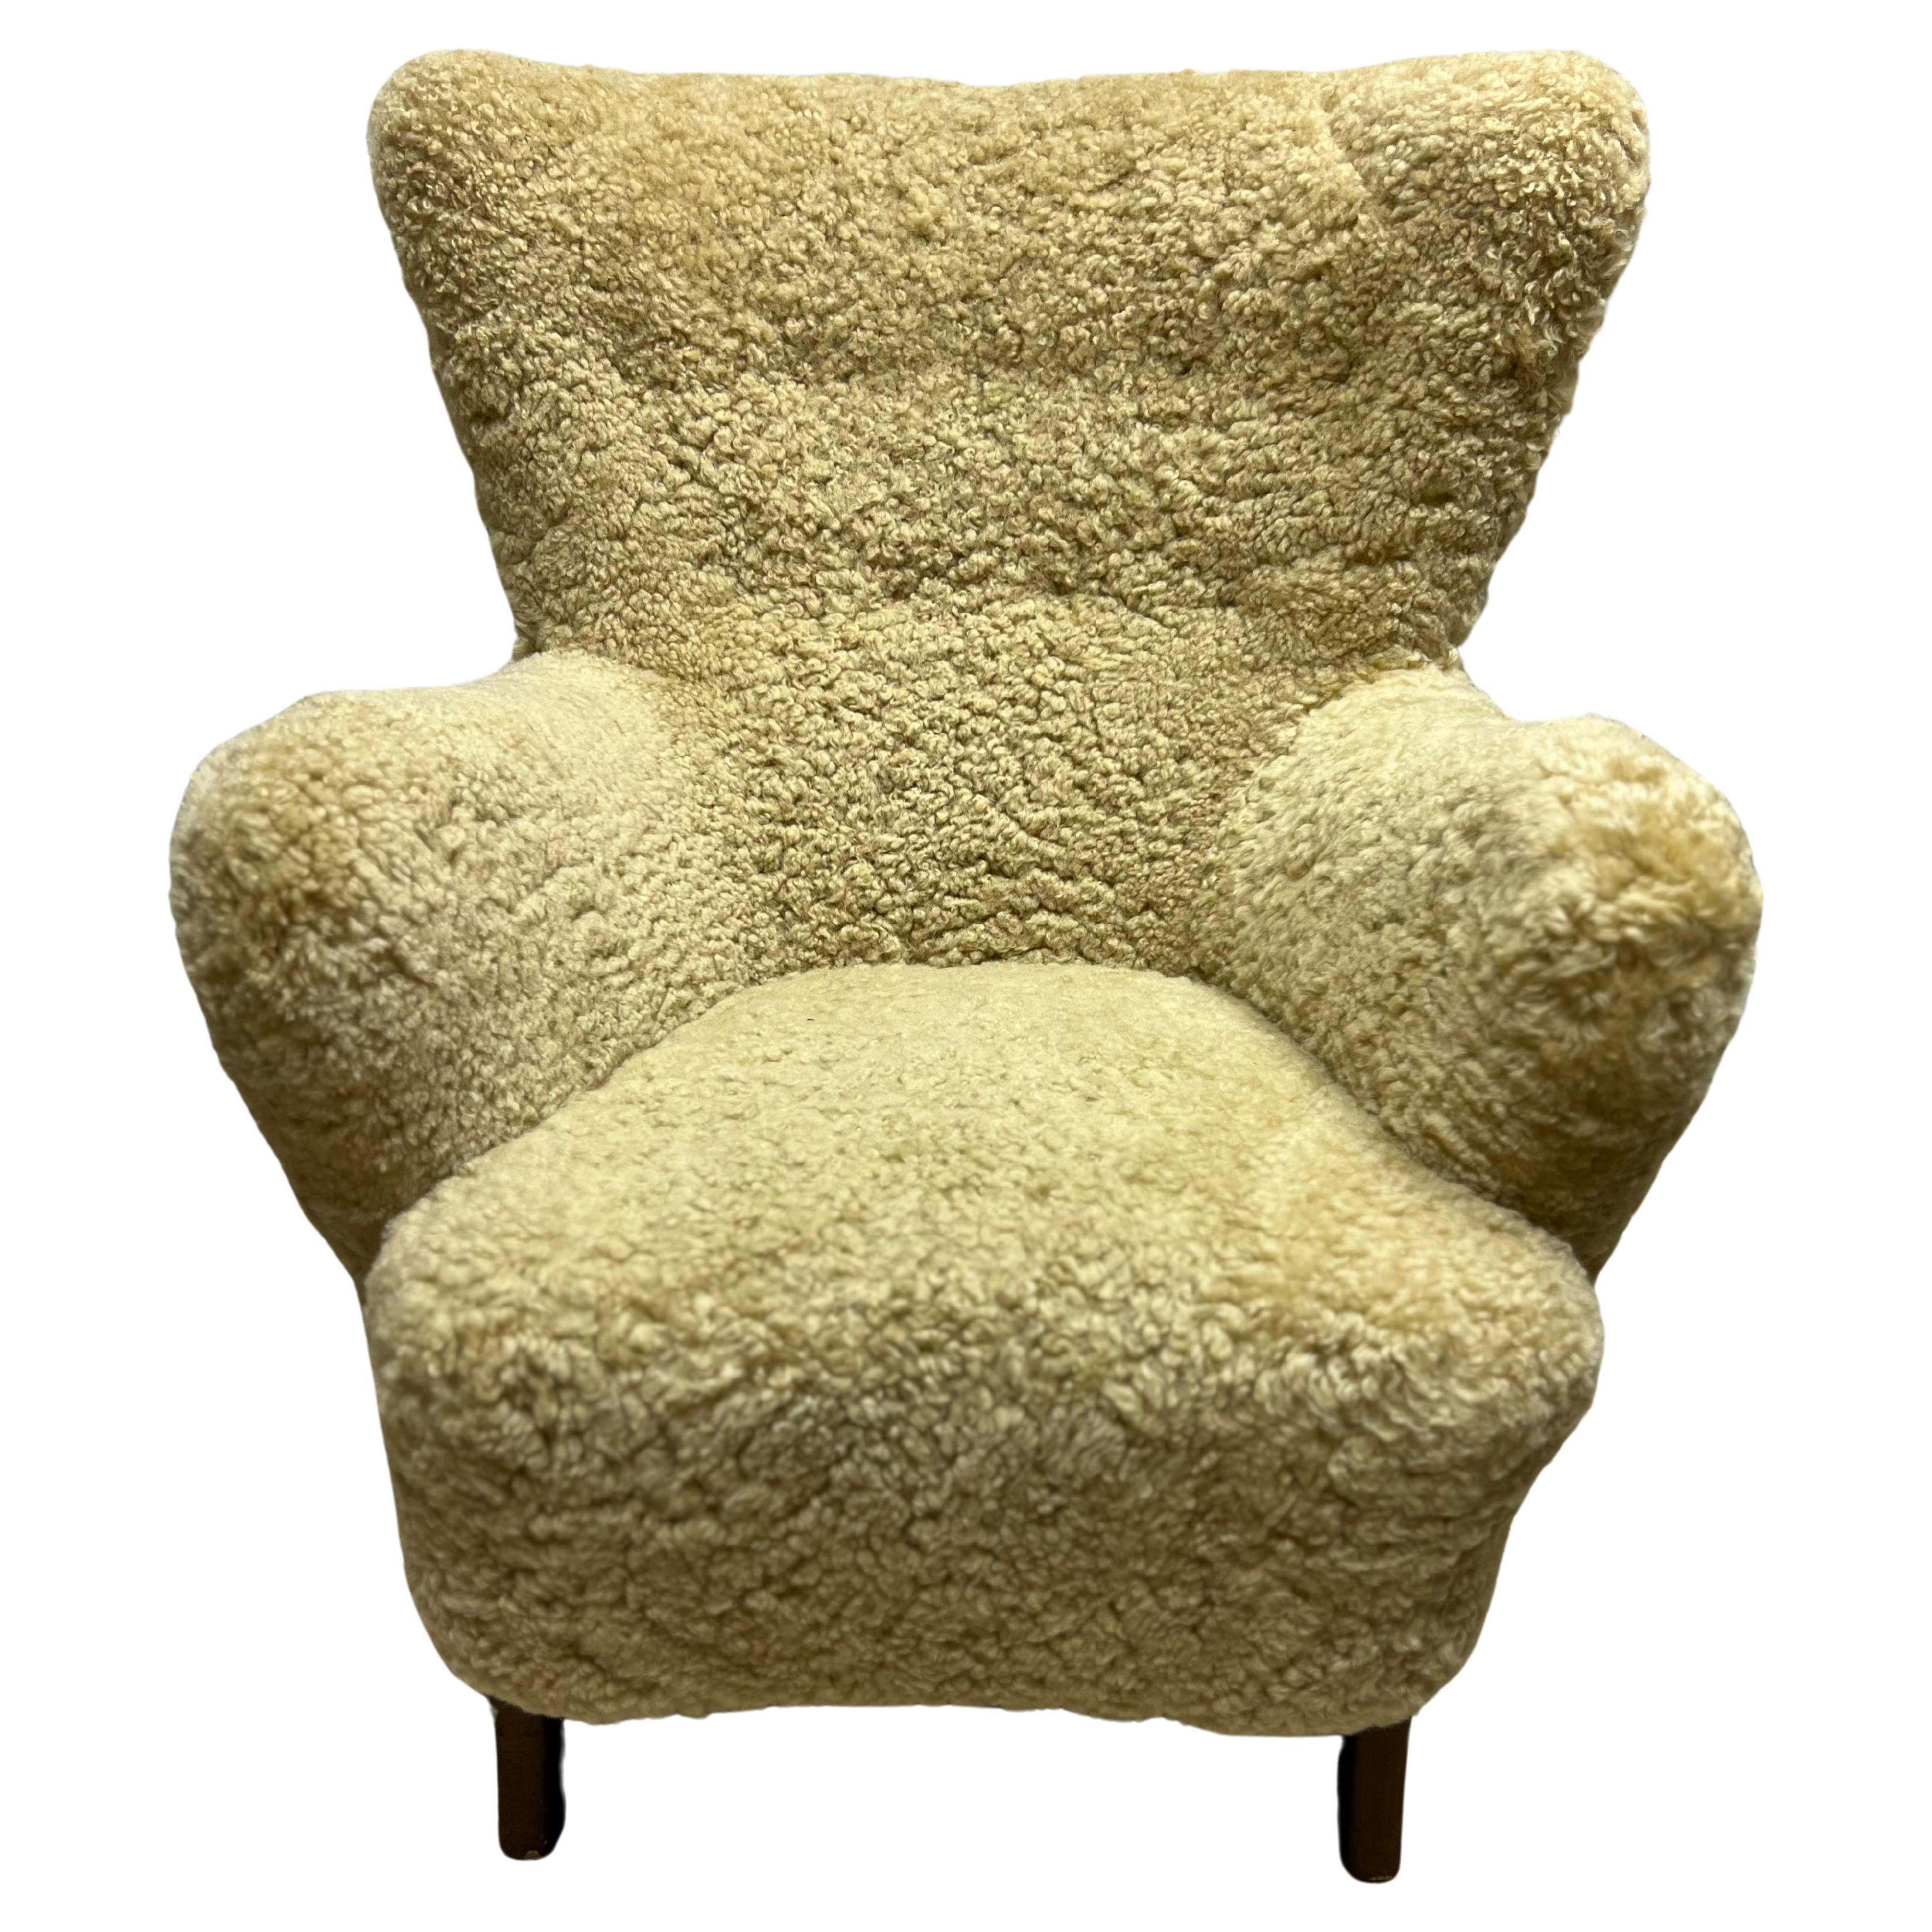 Pair of Shearling Chairs by Alfred Christensen, Denmark circa 1950 For Sale 1